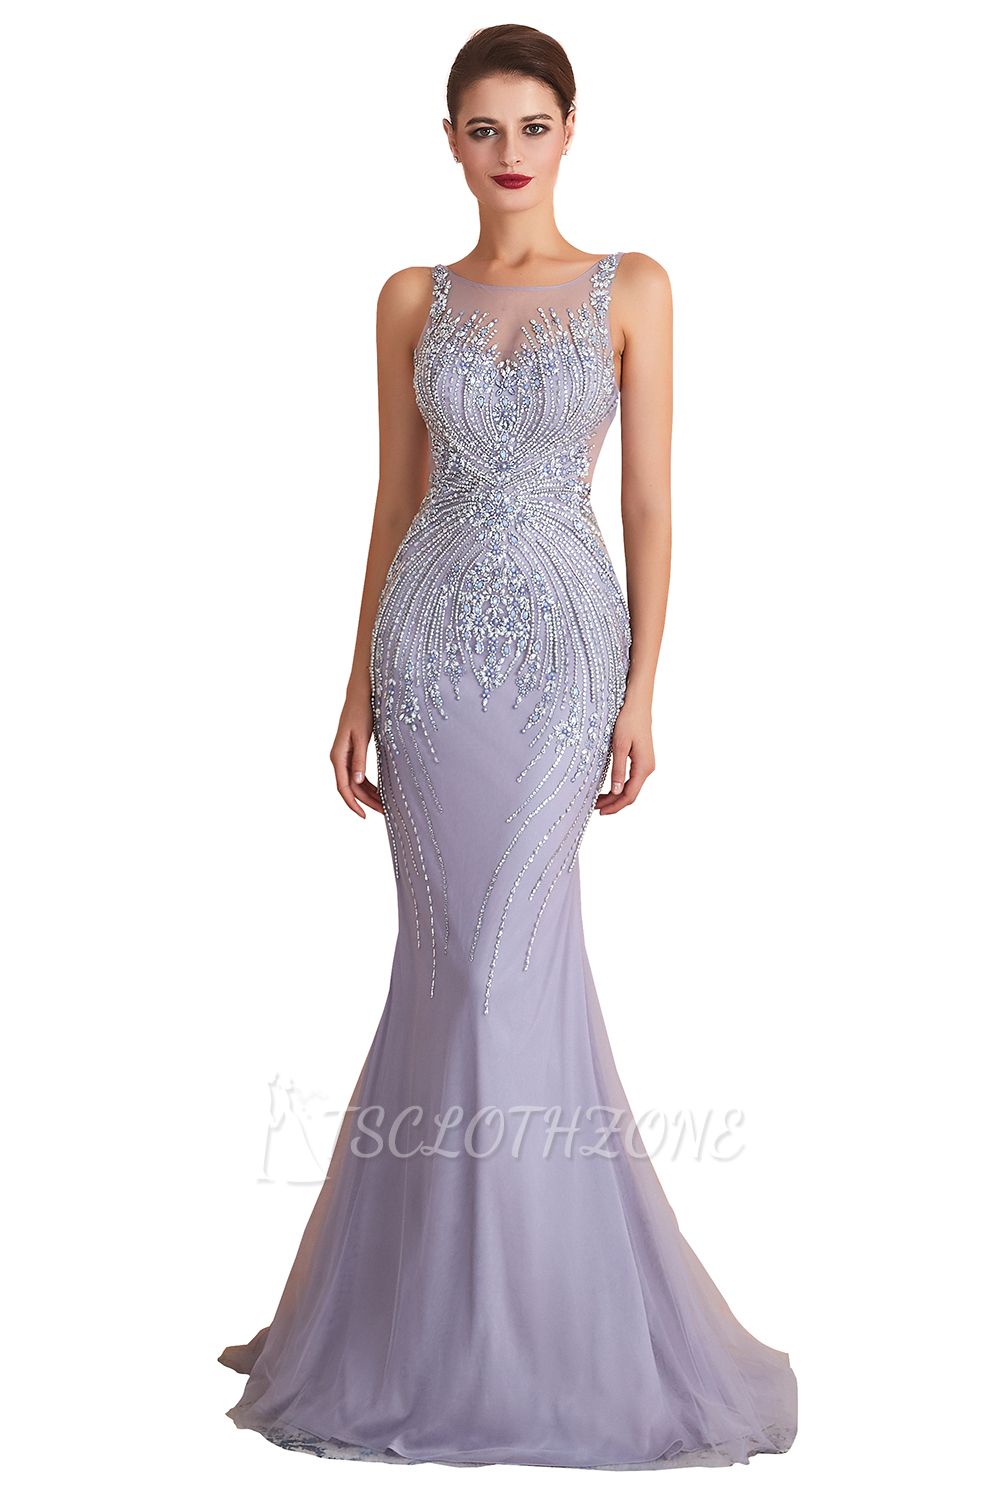 Chipo | Luxury Illusion neck Lavender White Beads Prom Dress Online, Expensive Low back Column Evening Gowns